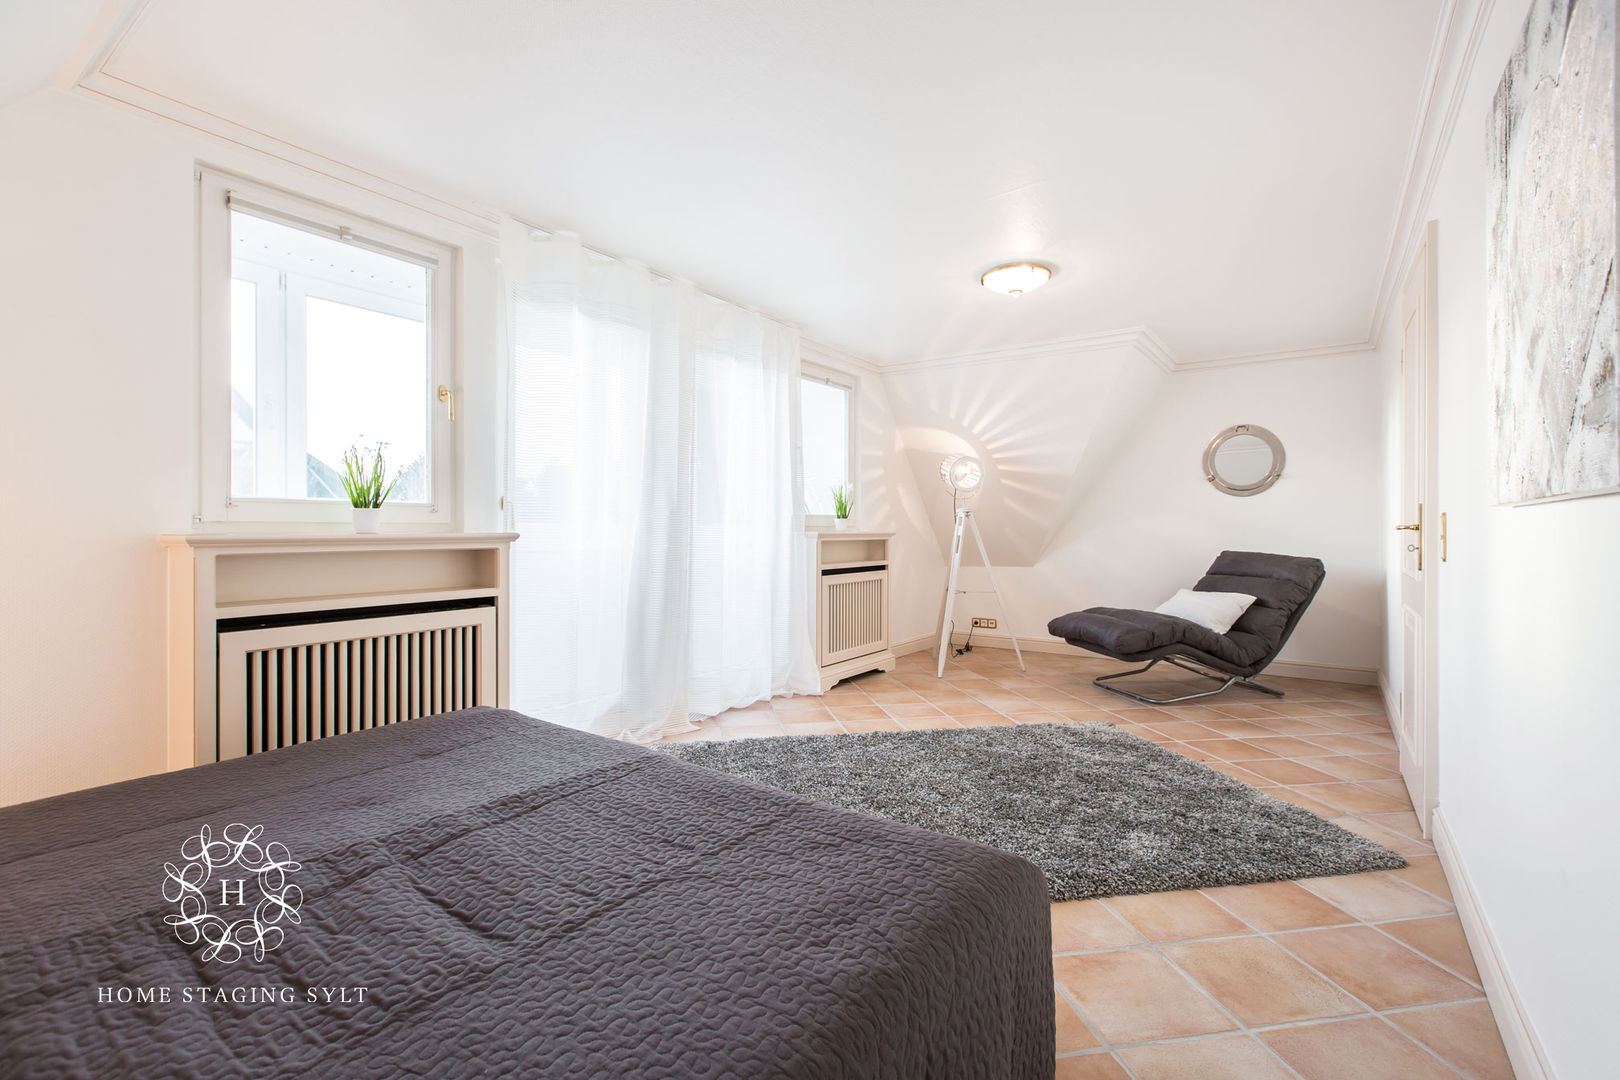 Home Staging Doppelhaus in Westerland/Sylt, Home Staging Sylt GmbH Home Staging Sylt GmbH غرفة نوم